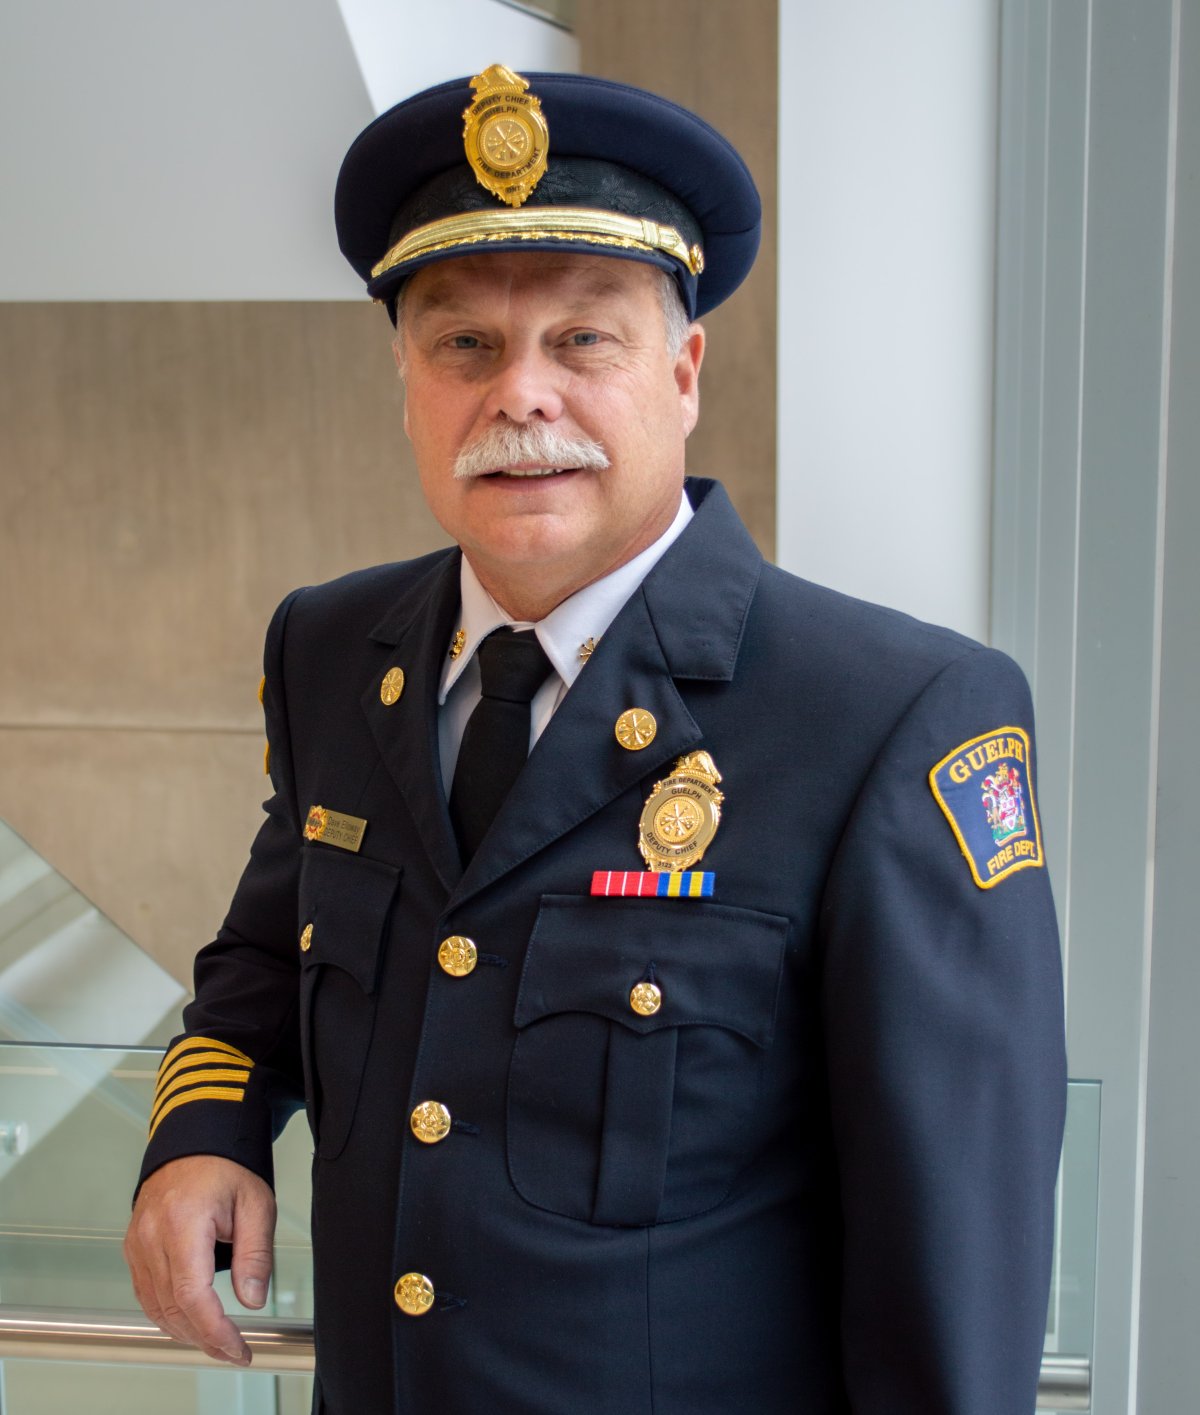 Guelph fire Chief Dave Elloway is set to retire at the end of March.